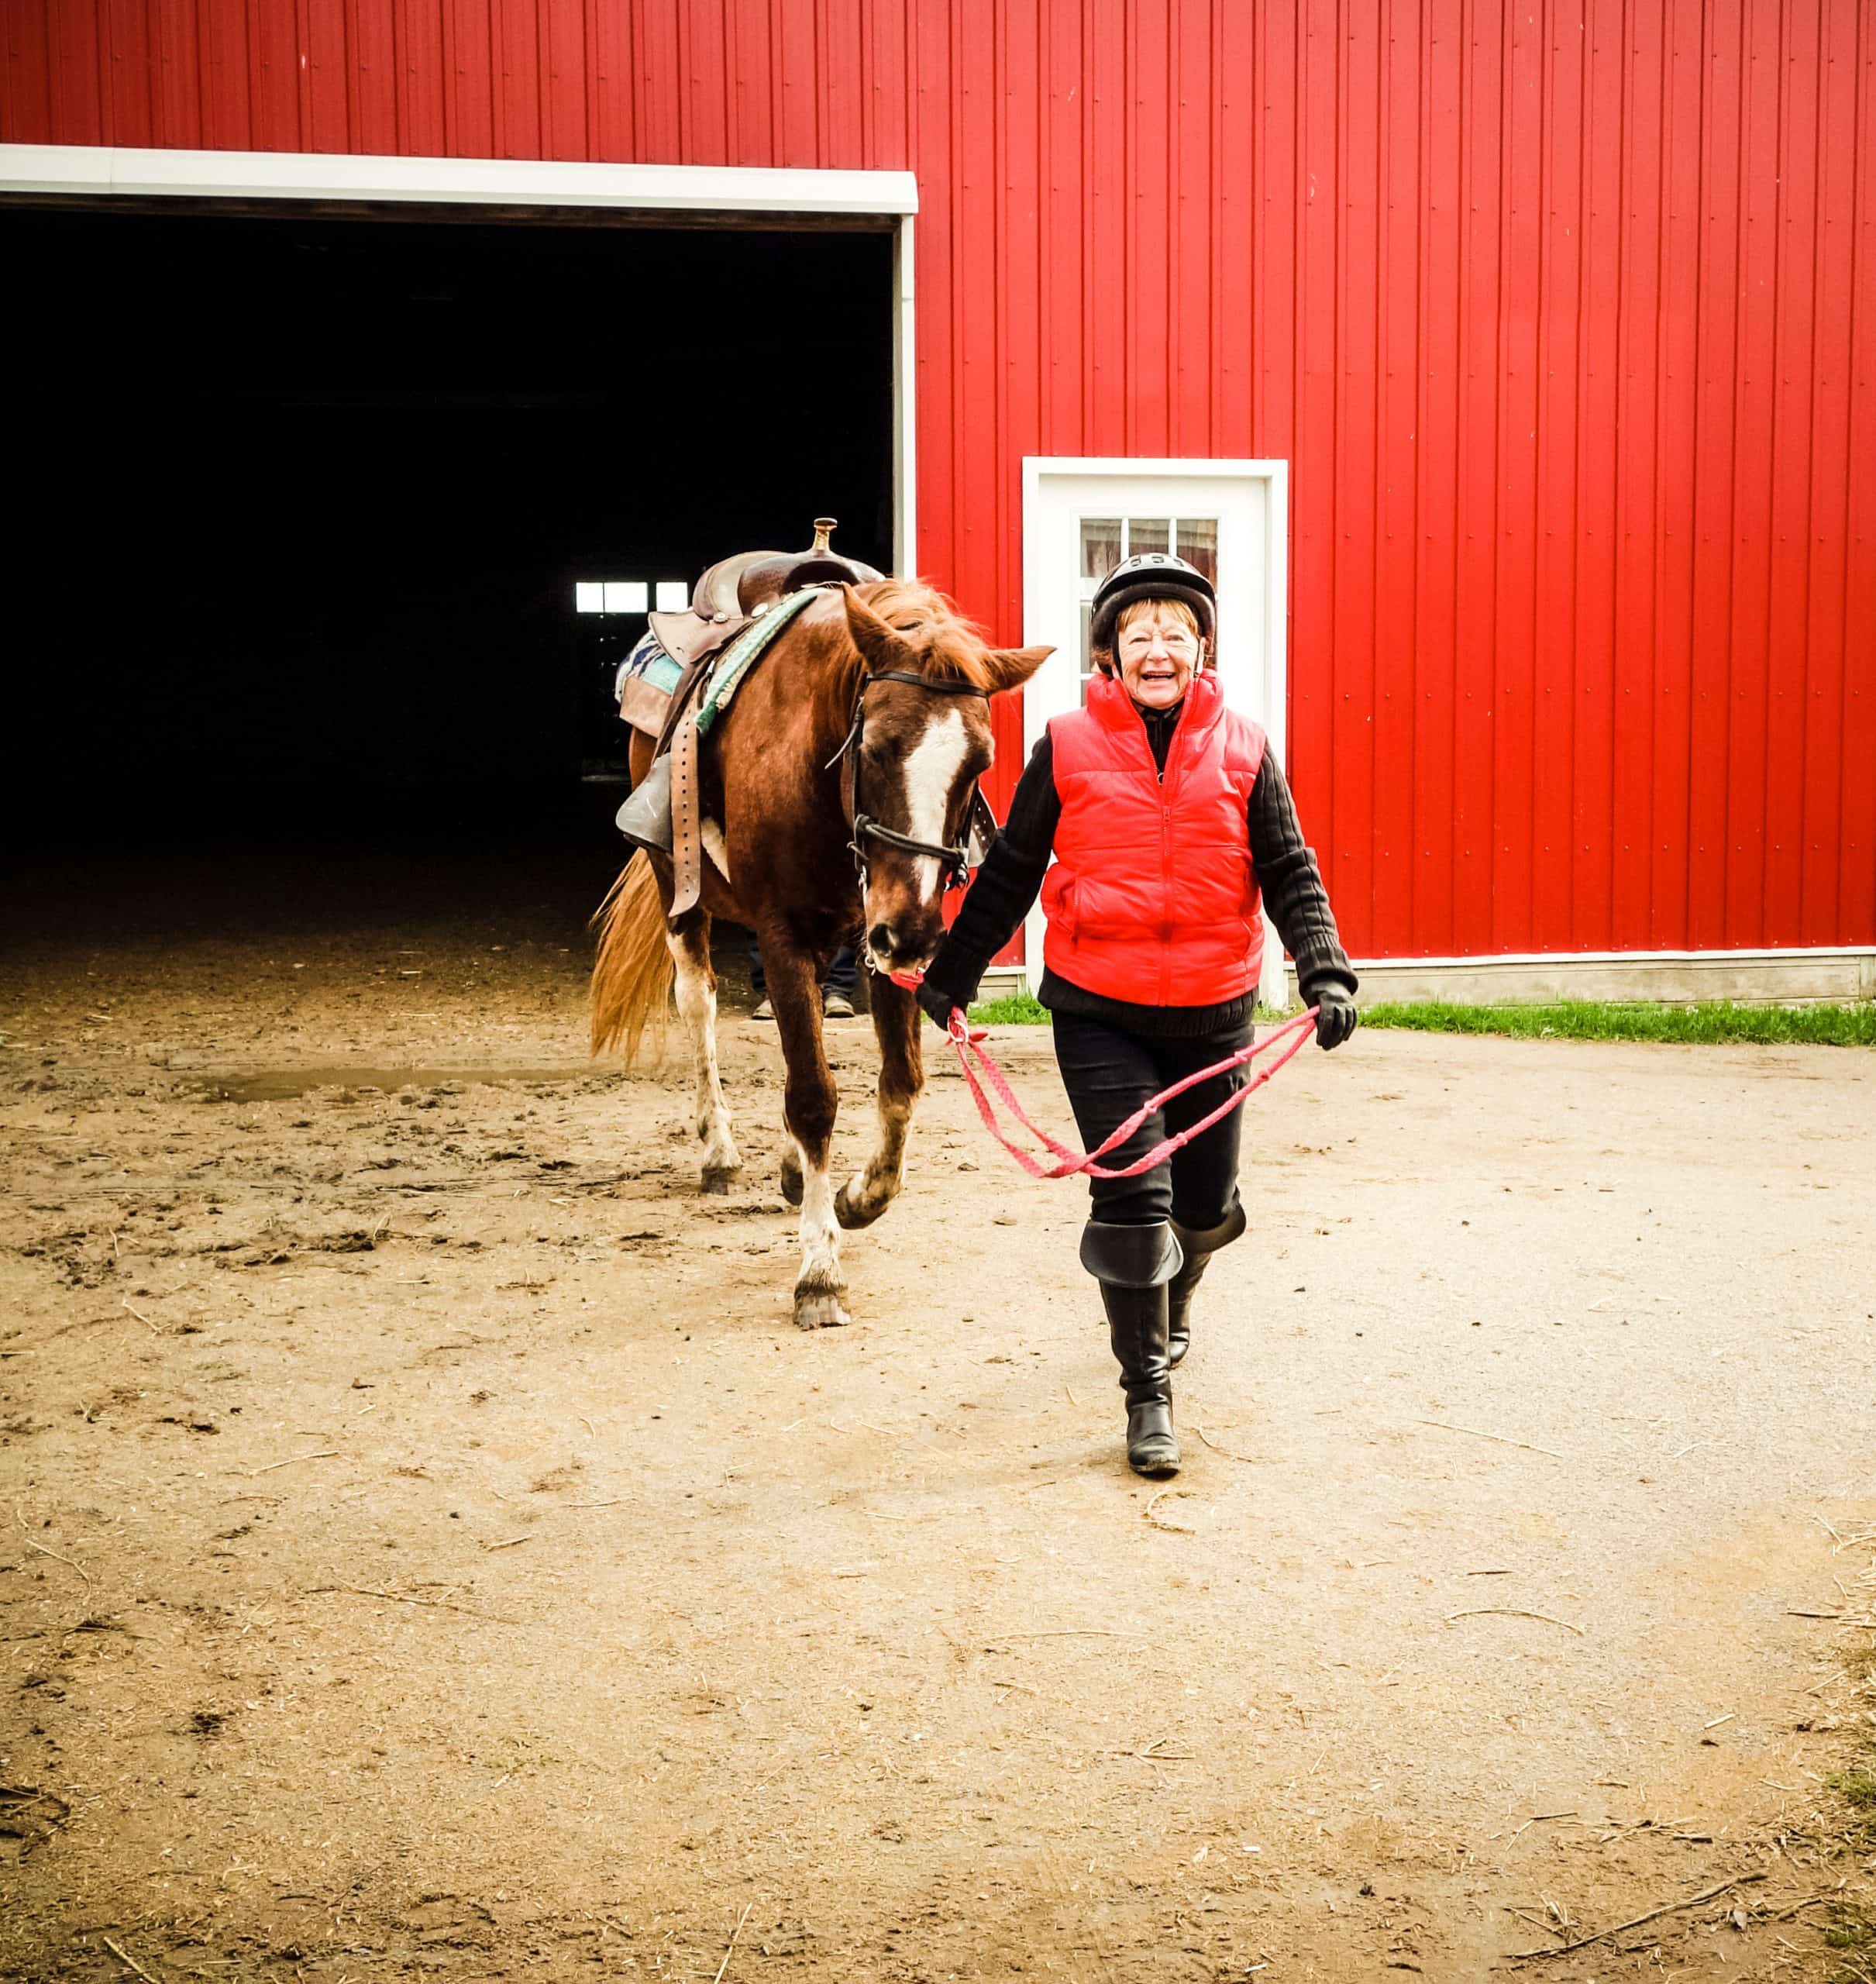 Senior citizen white woman in her 70's very pleased smiling as she is walking her horse from a  building with a large doorway.  She is wearing a red vest and protective riding gear and is holding the reins as she leads the horse from a red barn.  She is facing the camera with a big smile. There is a large dirt area in forefront for copy space.